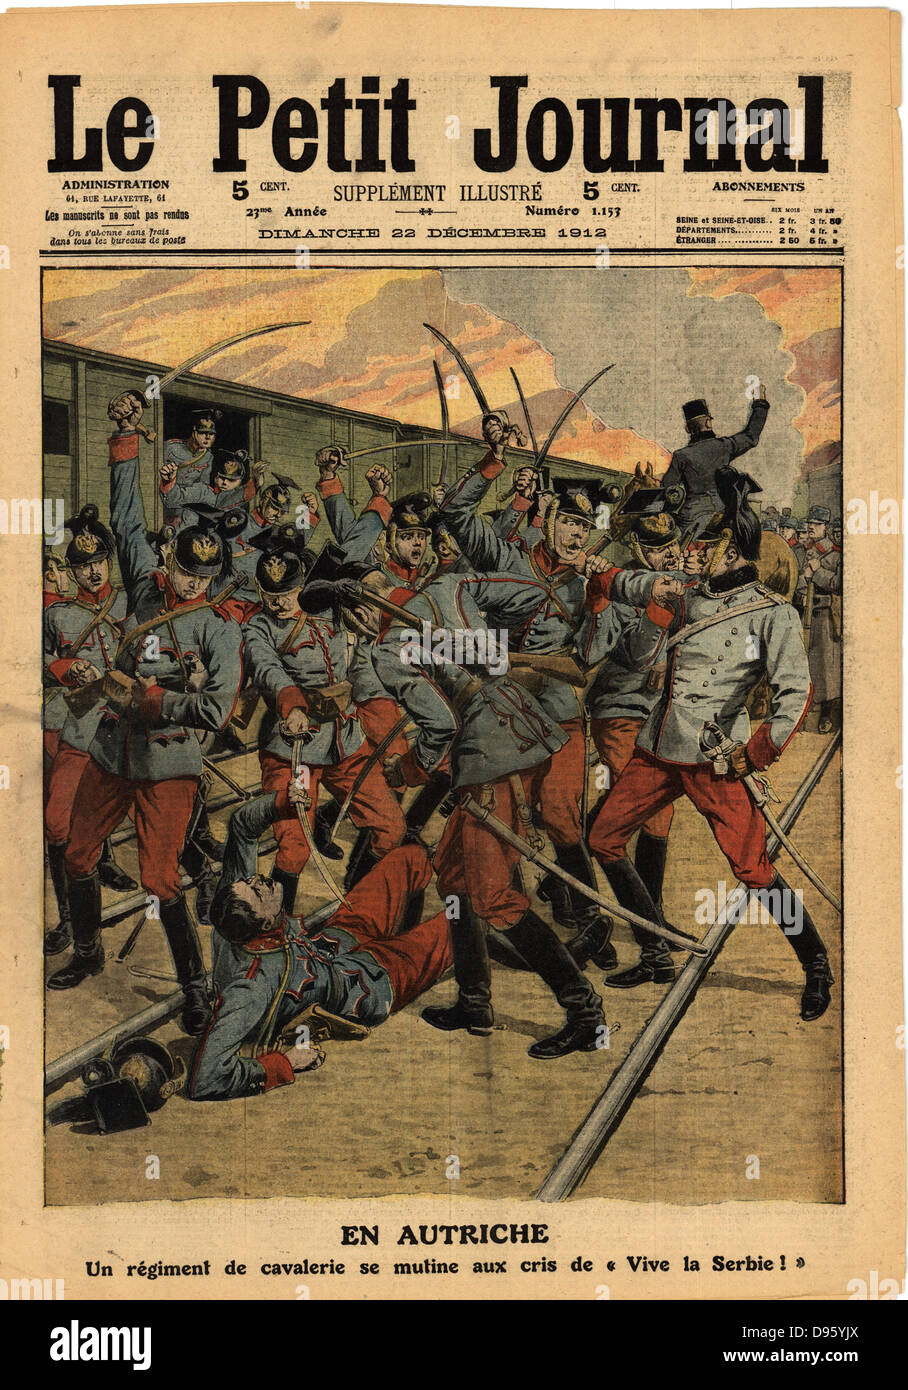 Balkan Wars: Mutiny of an Austrian cavalry regiment to cries of 'Long Live Serbia' . From 'Le Petit Journal',  Paris, 22 December 1912. Stock Photo